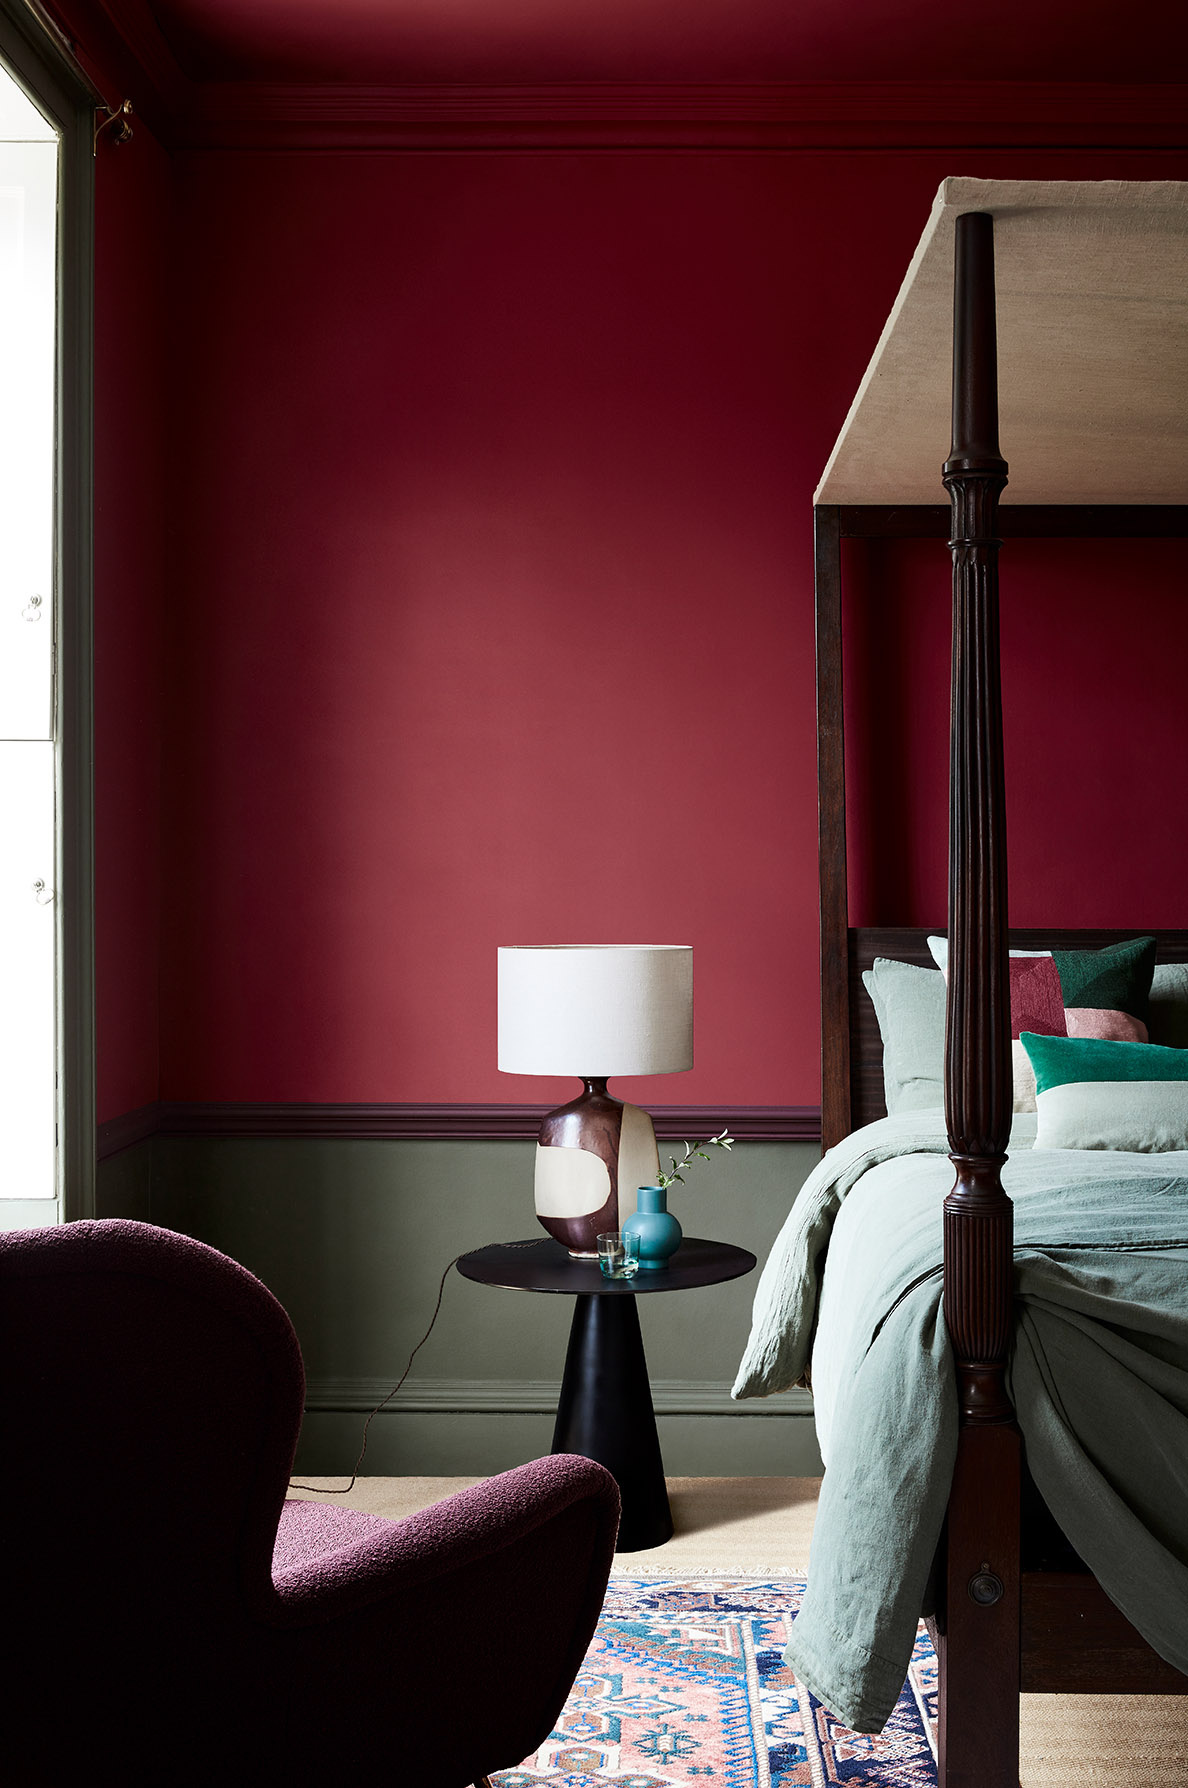 Buy 'Baked Cherry' Deep Red Paint Online